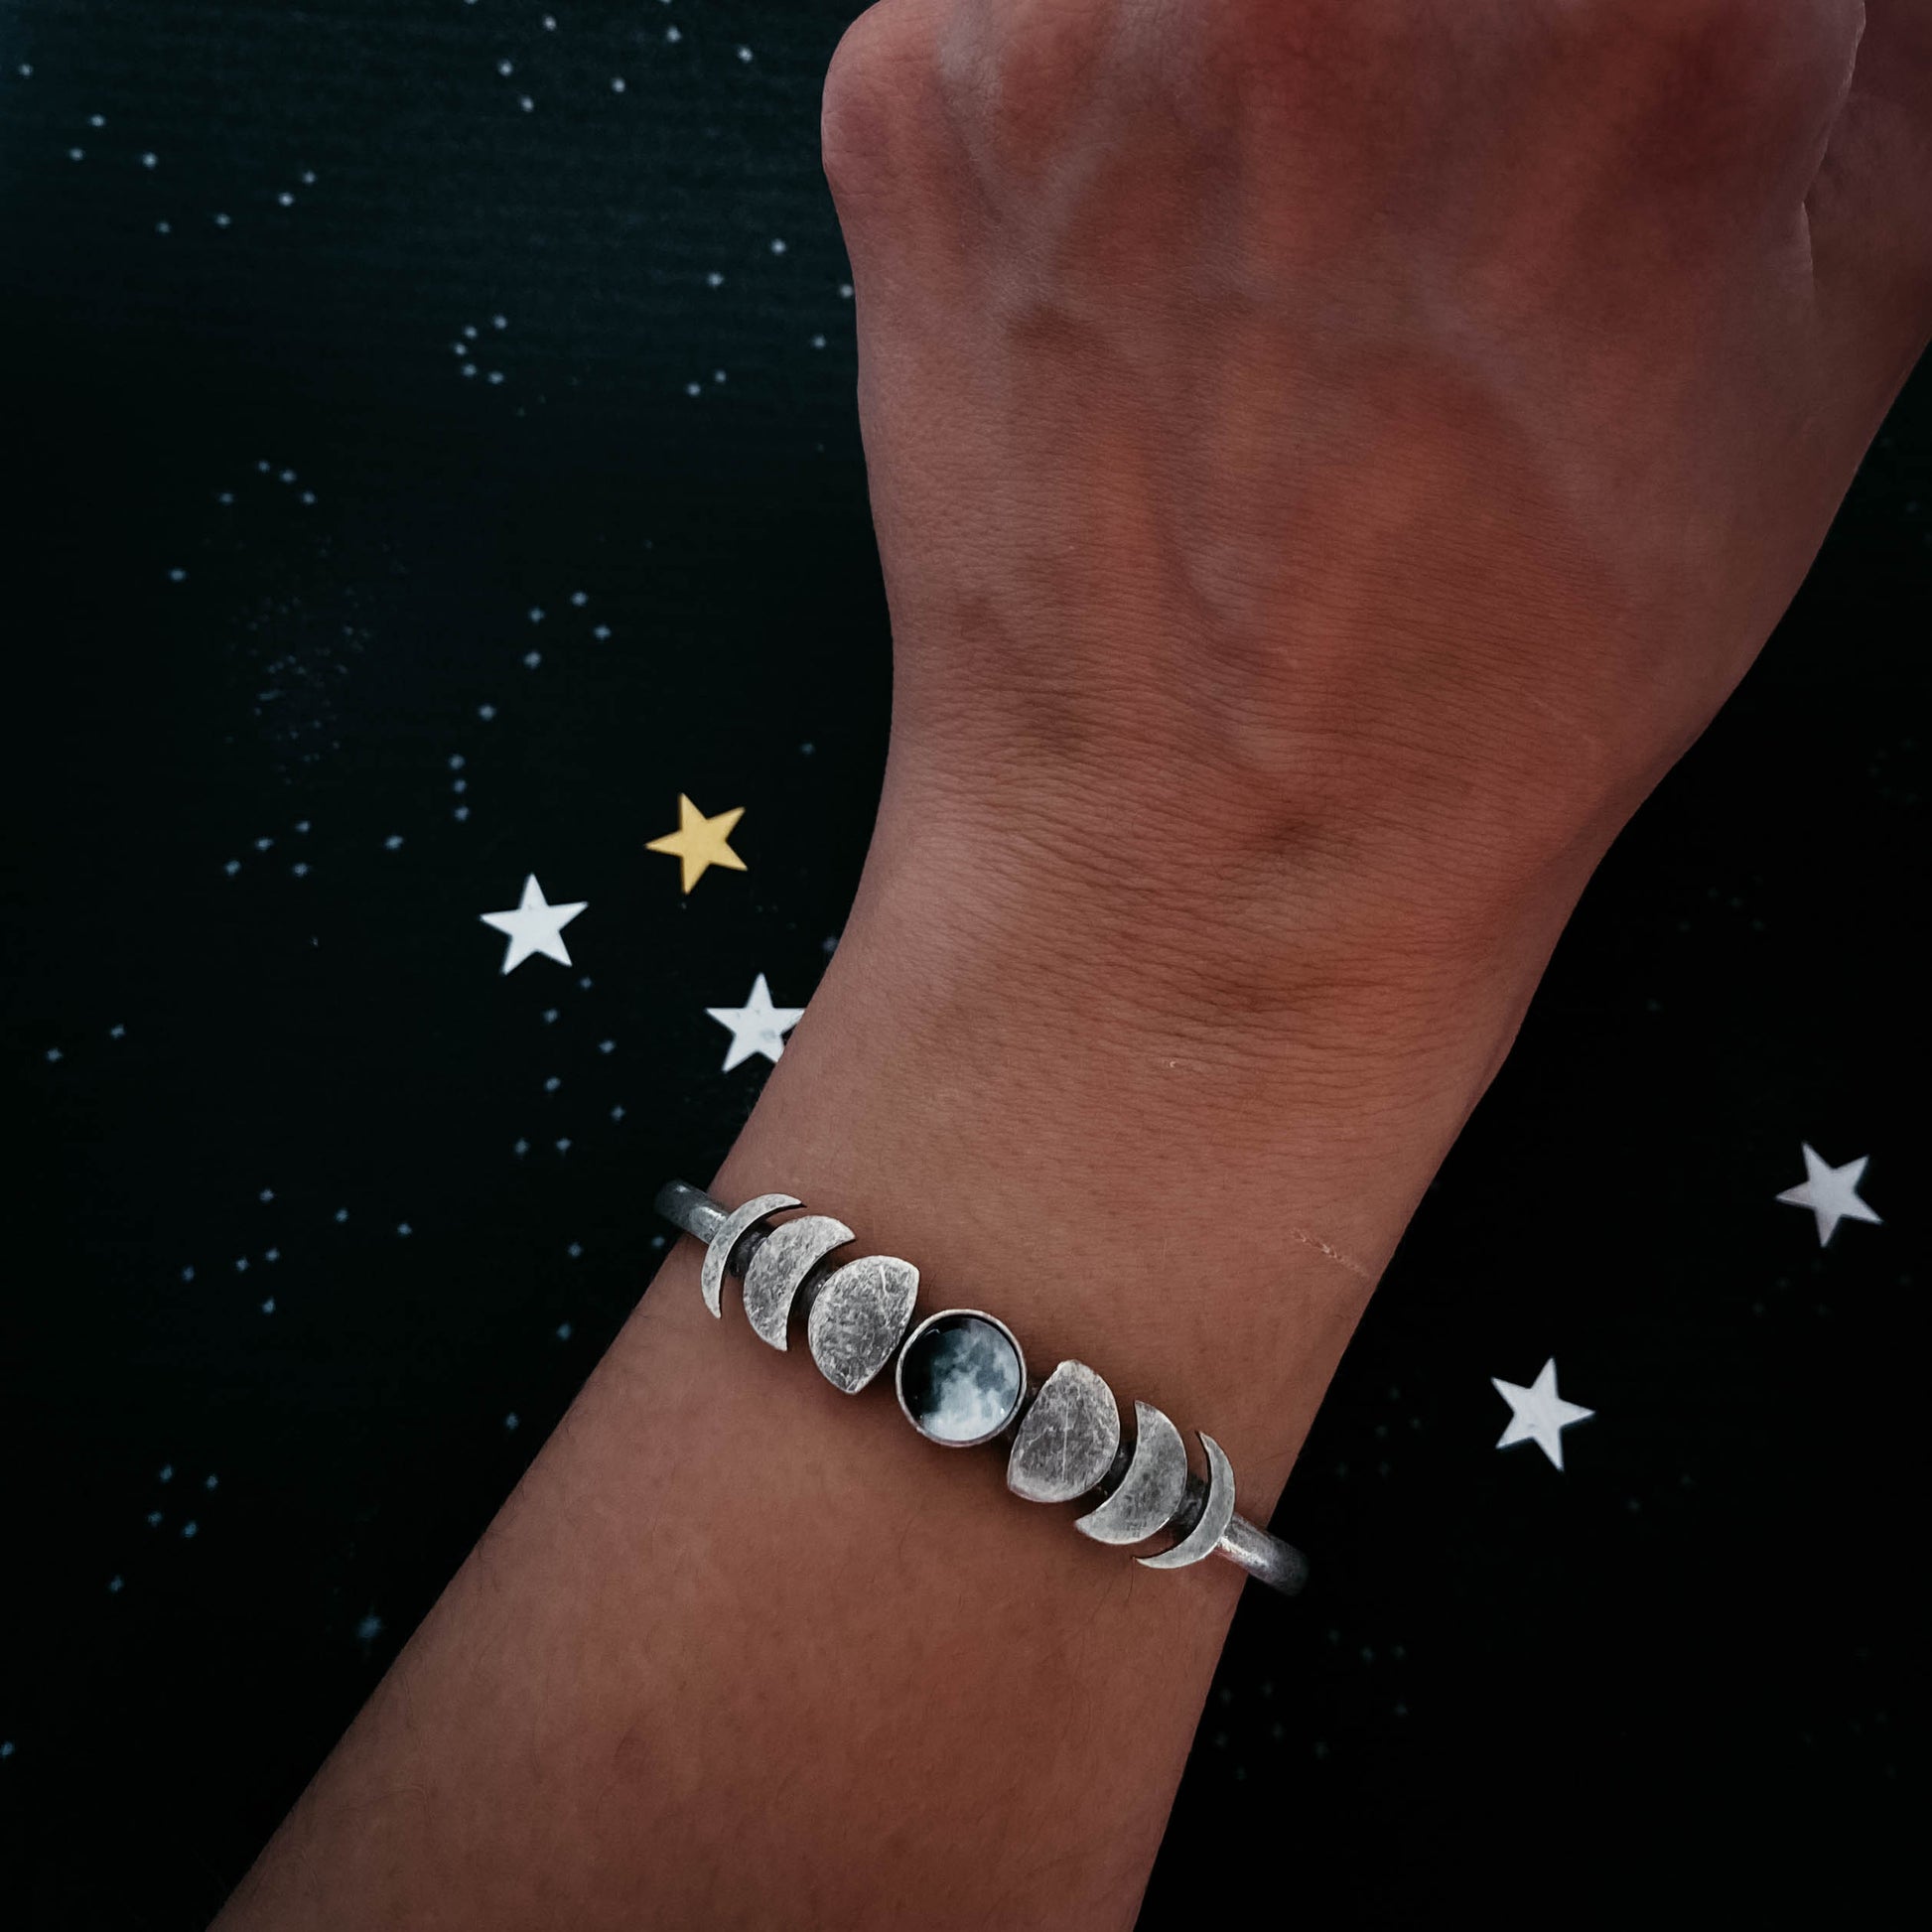 My Moon Cuff Bracelet with Lunar Phases - Gold or Silver Tone Bracelet Yugen Handmade   